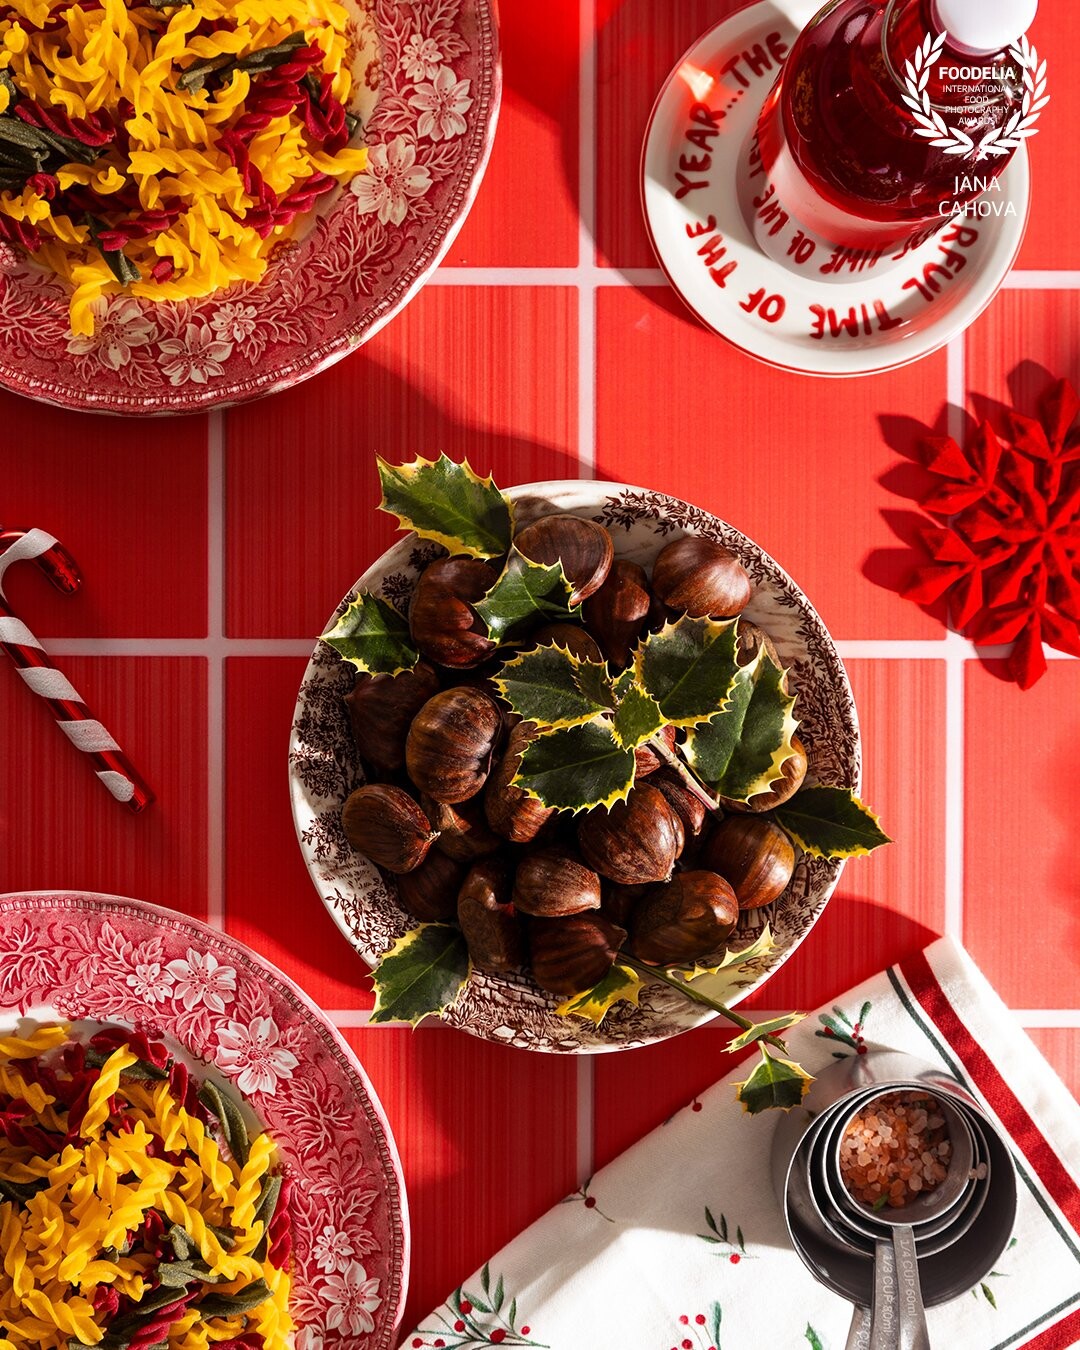  I call this “Christmas in Italy..Nothing beats roasted chestnuts coming out of your oven, colorful Christmas pasta and of course, don’t forget to deck it with boughs of holly!